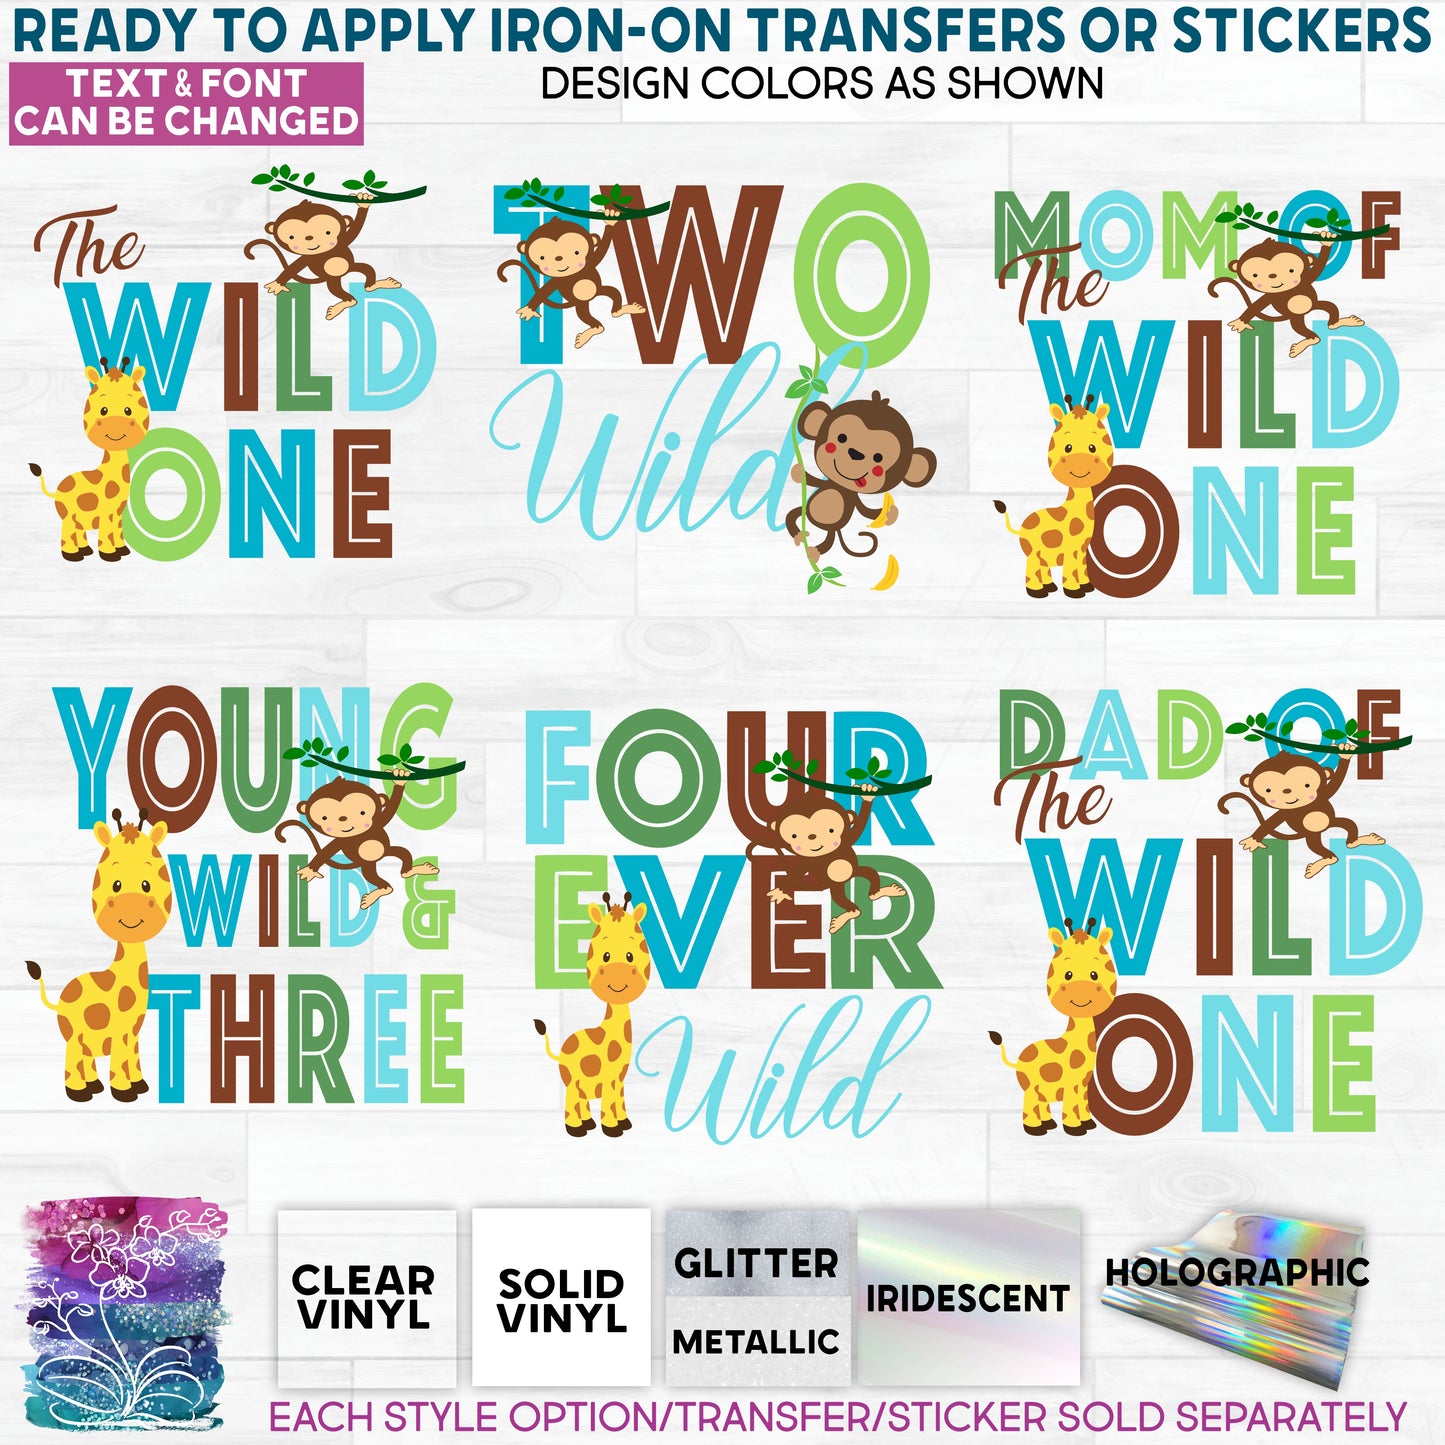 (s132-B3) Jungle Family, Mom of the Wild One, Custom Text Glitter or Vinyl Iron-On Transfer or Sticker